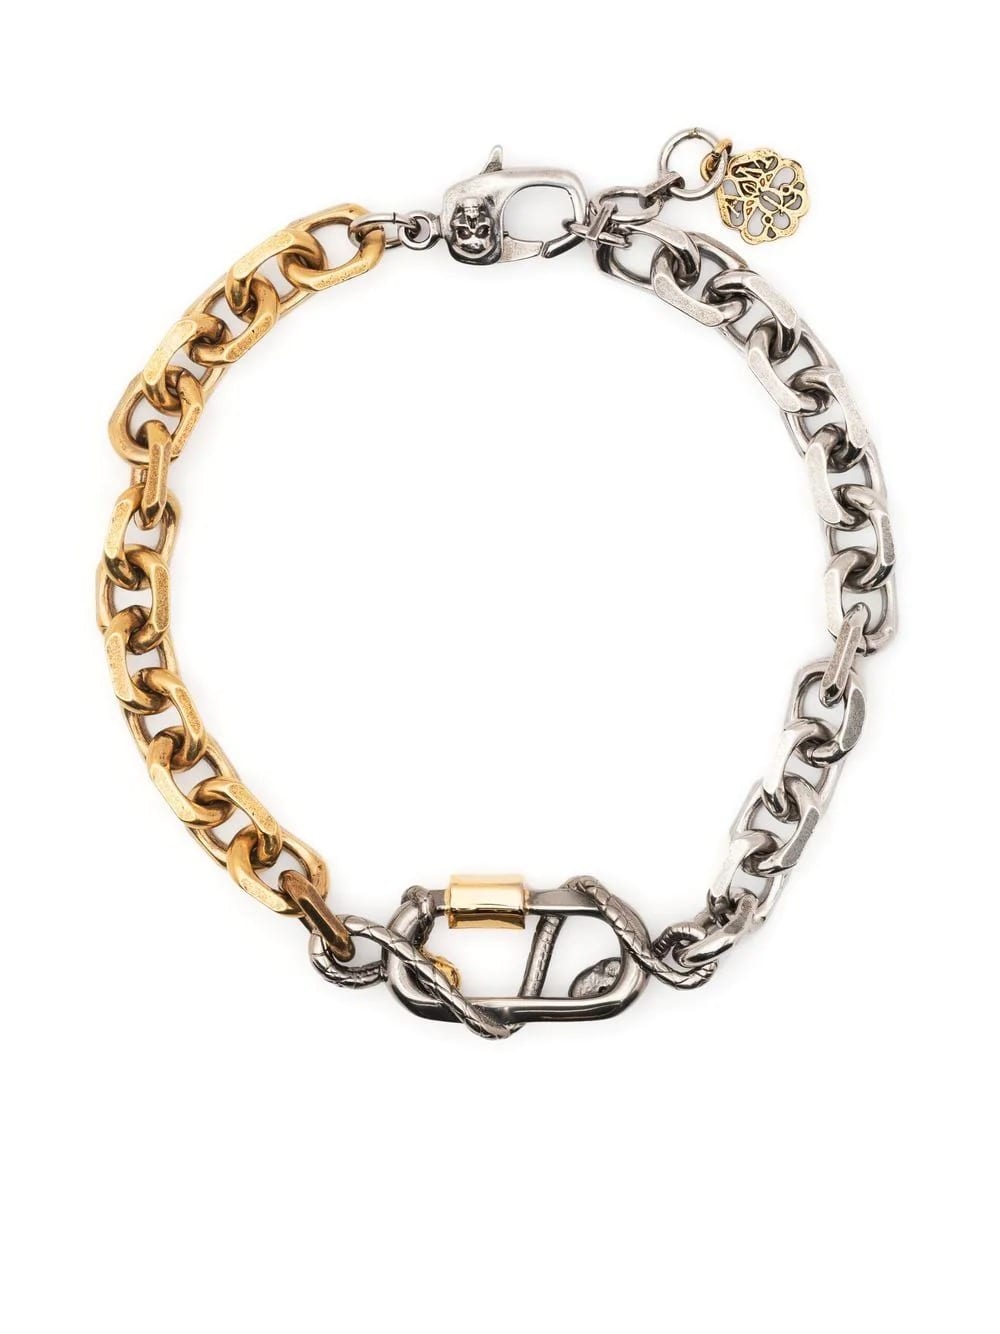 ALEXANDER MCQUEEN GOLD AND SILVER CHAIN BRACELET